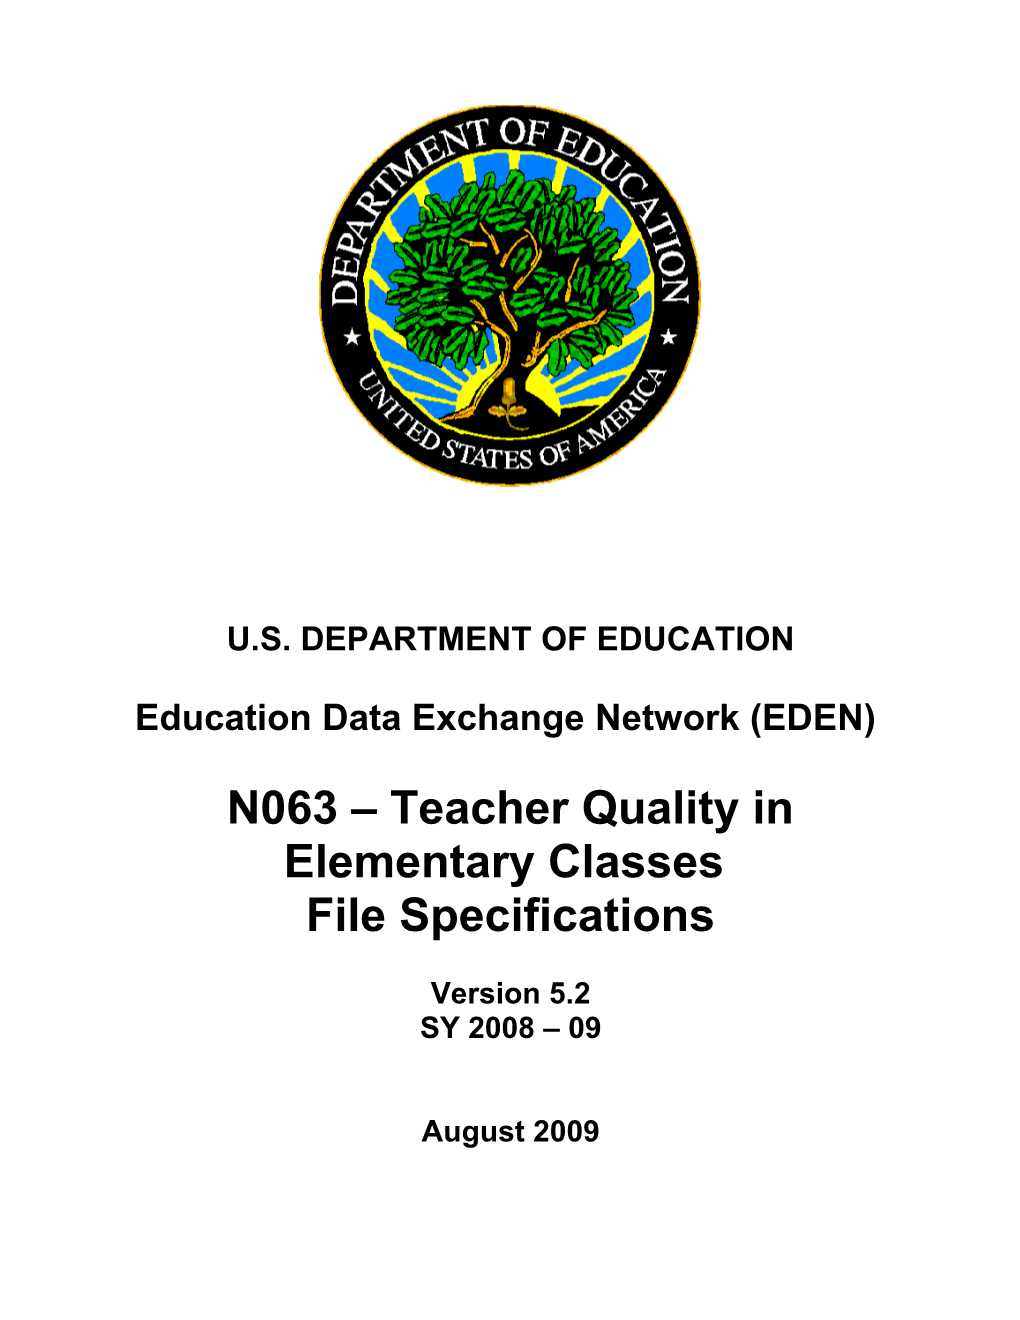 N063 Teacher Quality in Elementary Classes File Specifications (MS Word)